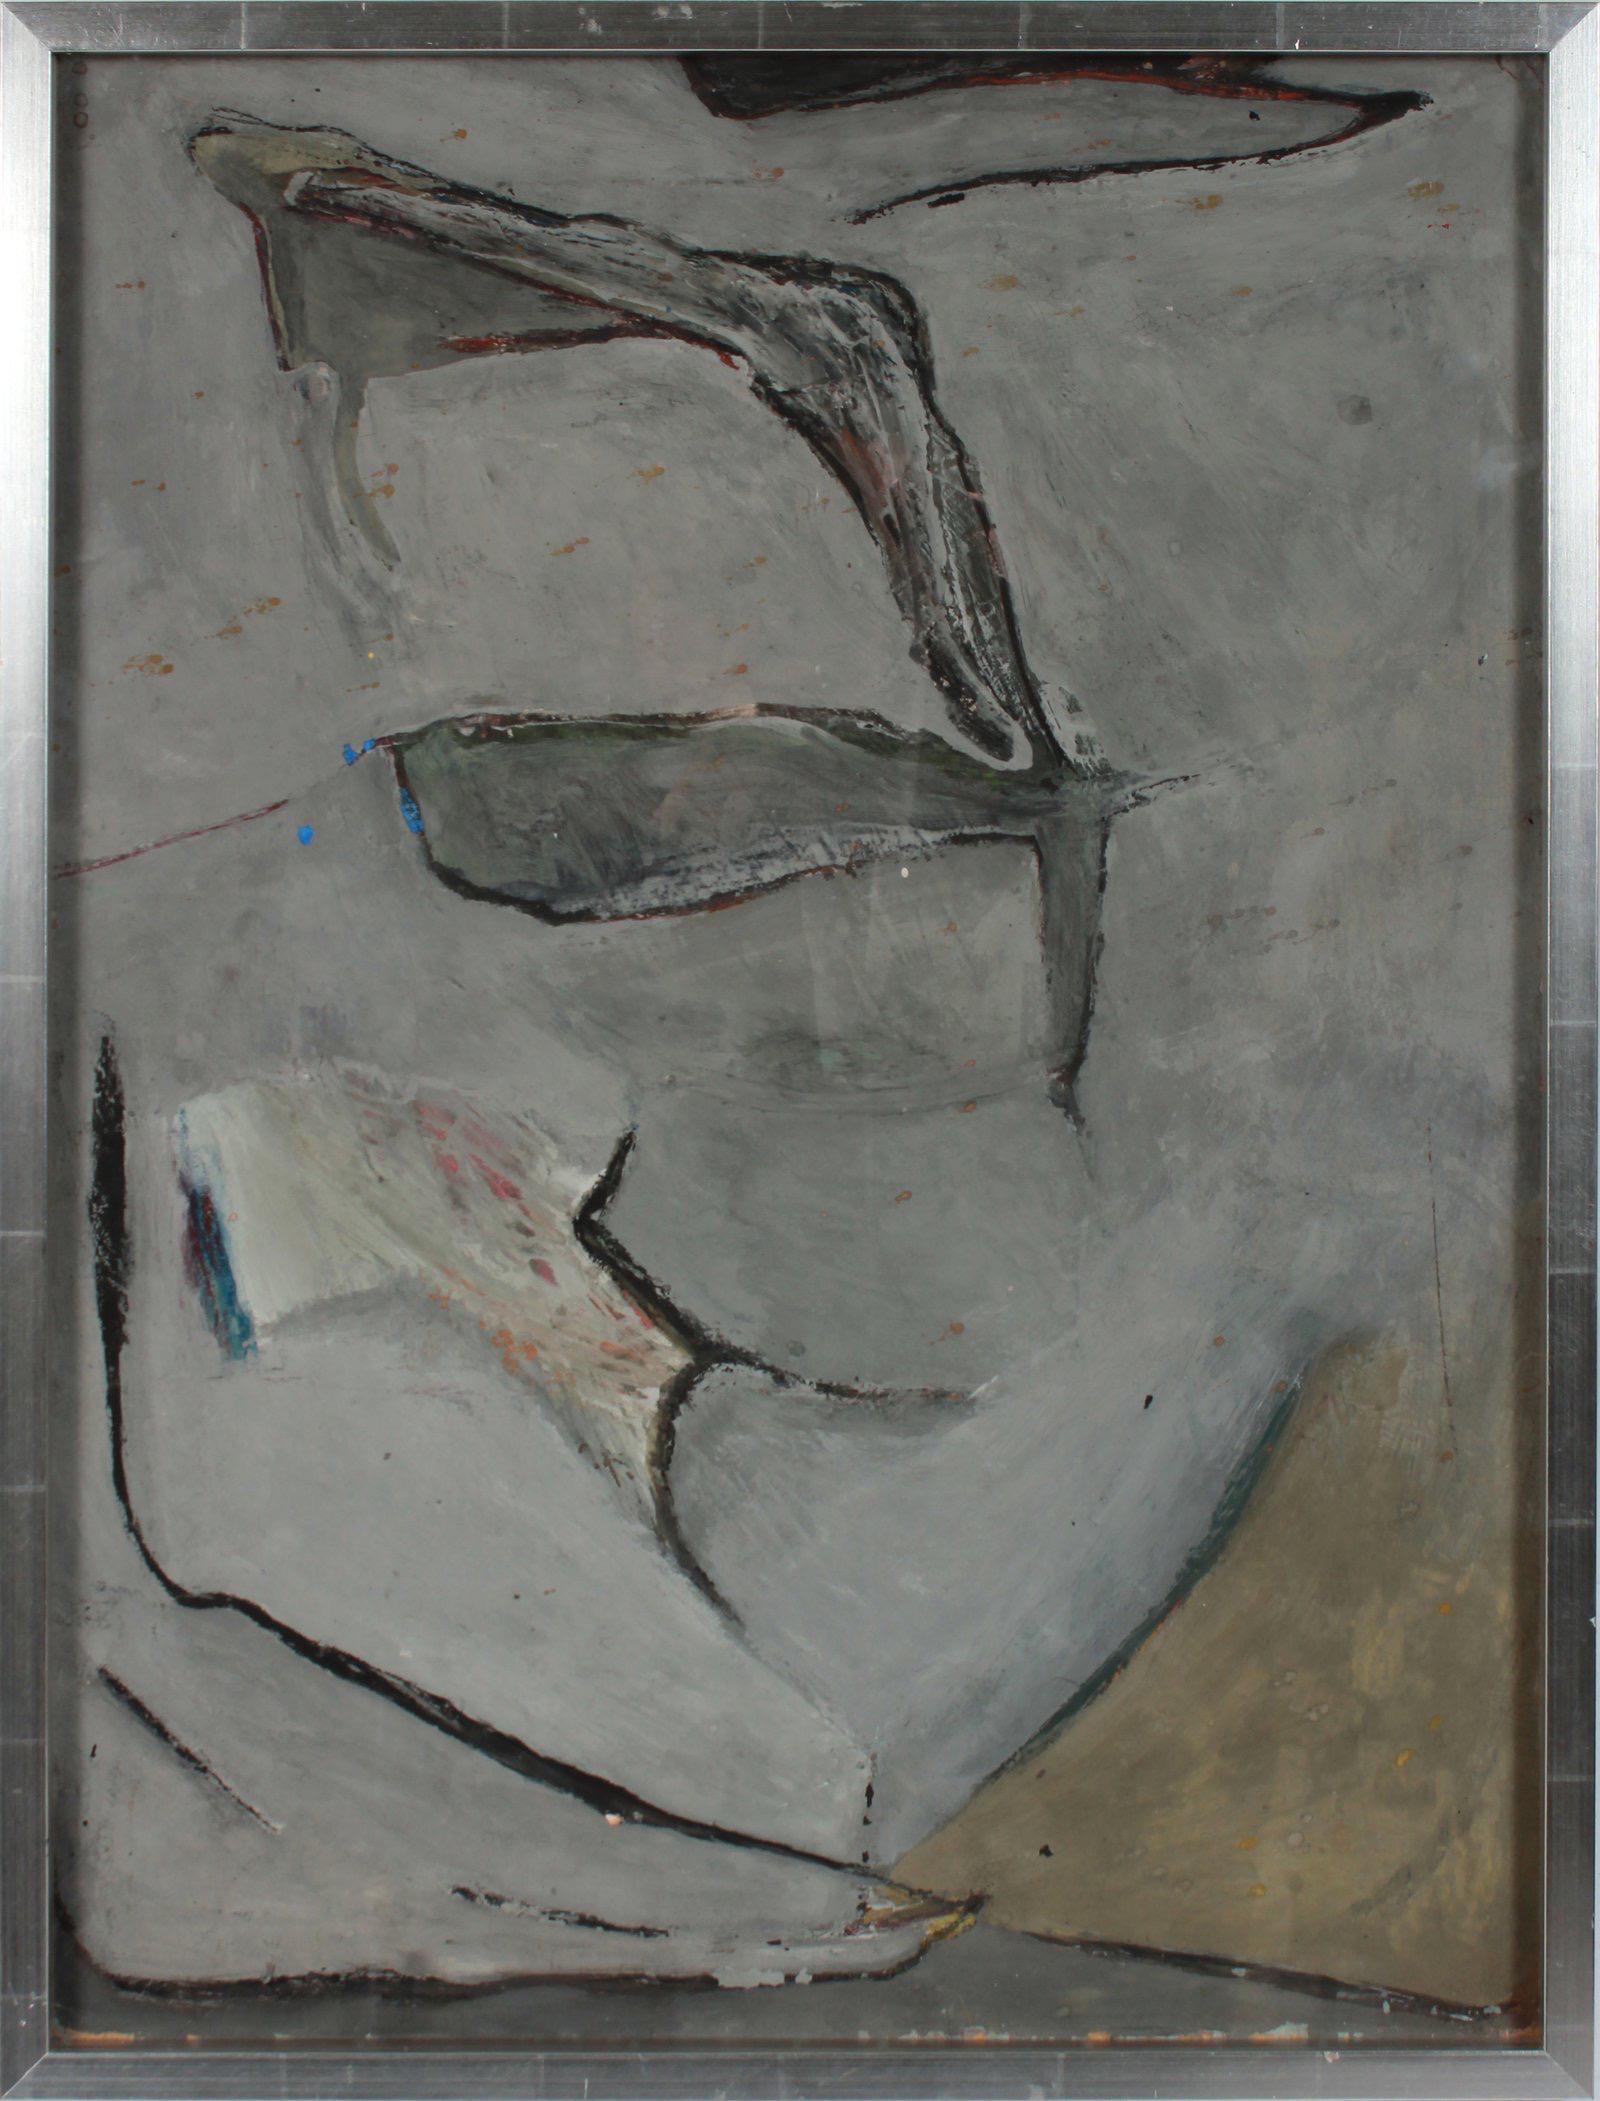 Jack Freeman Abstract Painting - Gray Subdued Abstract 1950s-1960s Acrylic and Charcoal